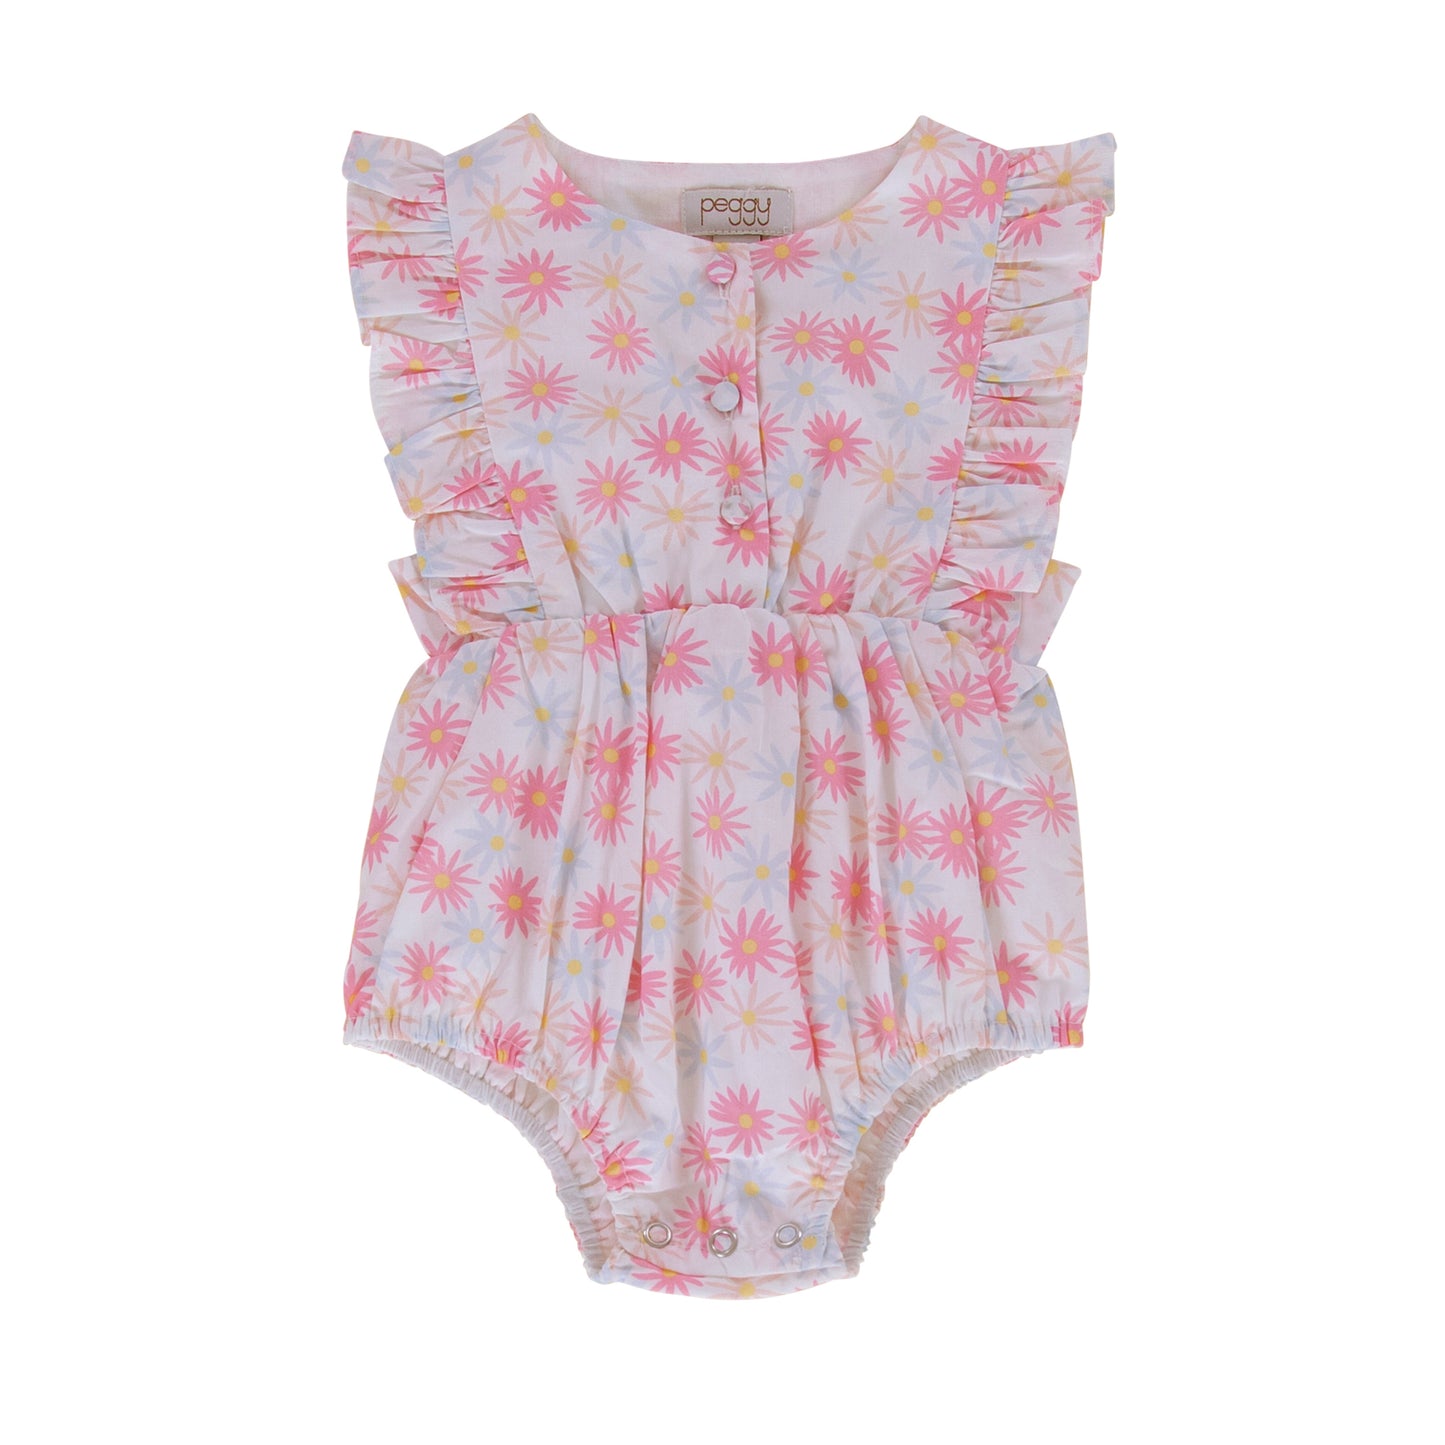 August Playsuit Betsy Peterson Daisy Print